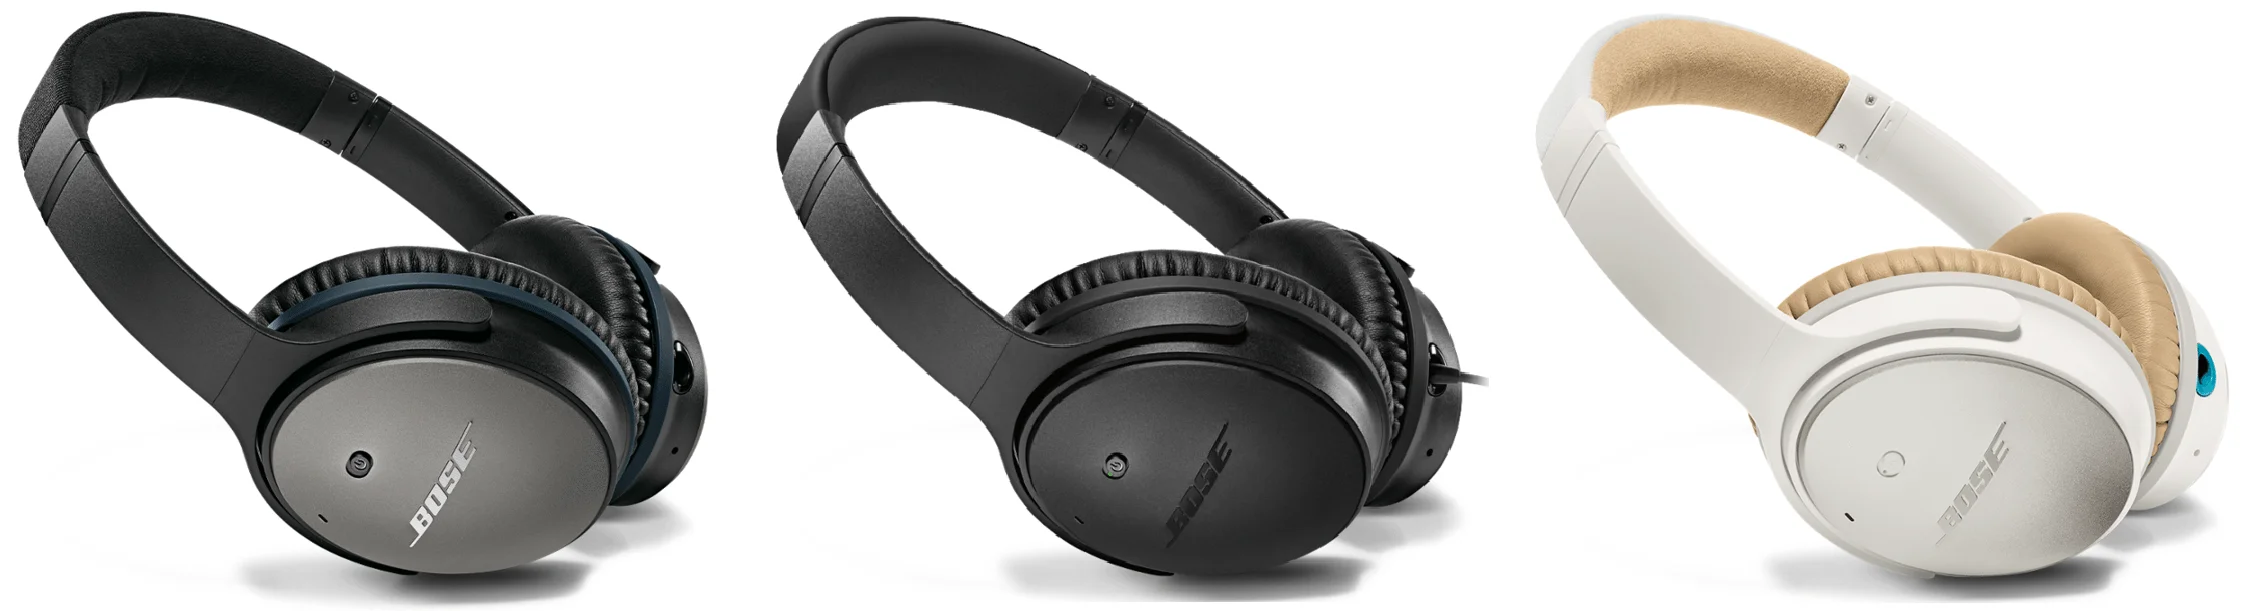 QuietComfort 25 Noise Cancelling Over-Ear Headphone Review Gadget Review